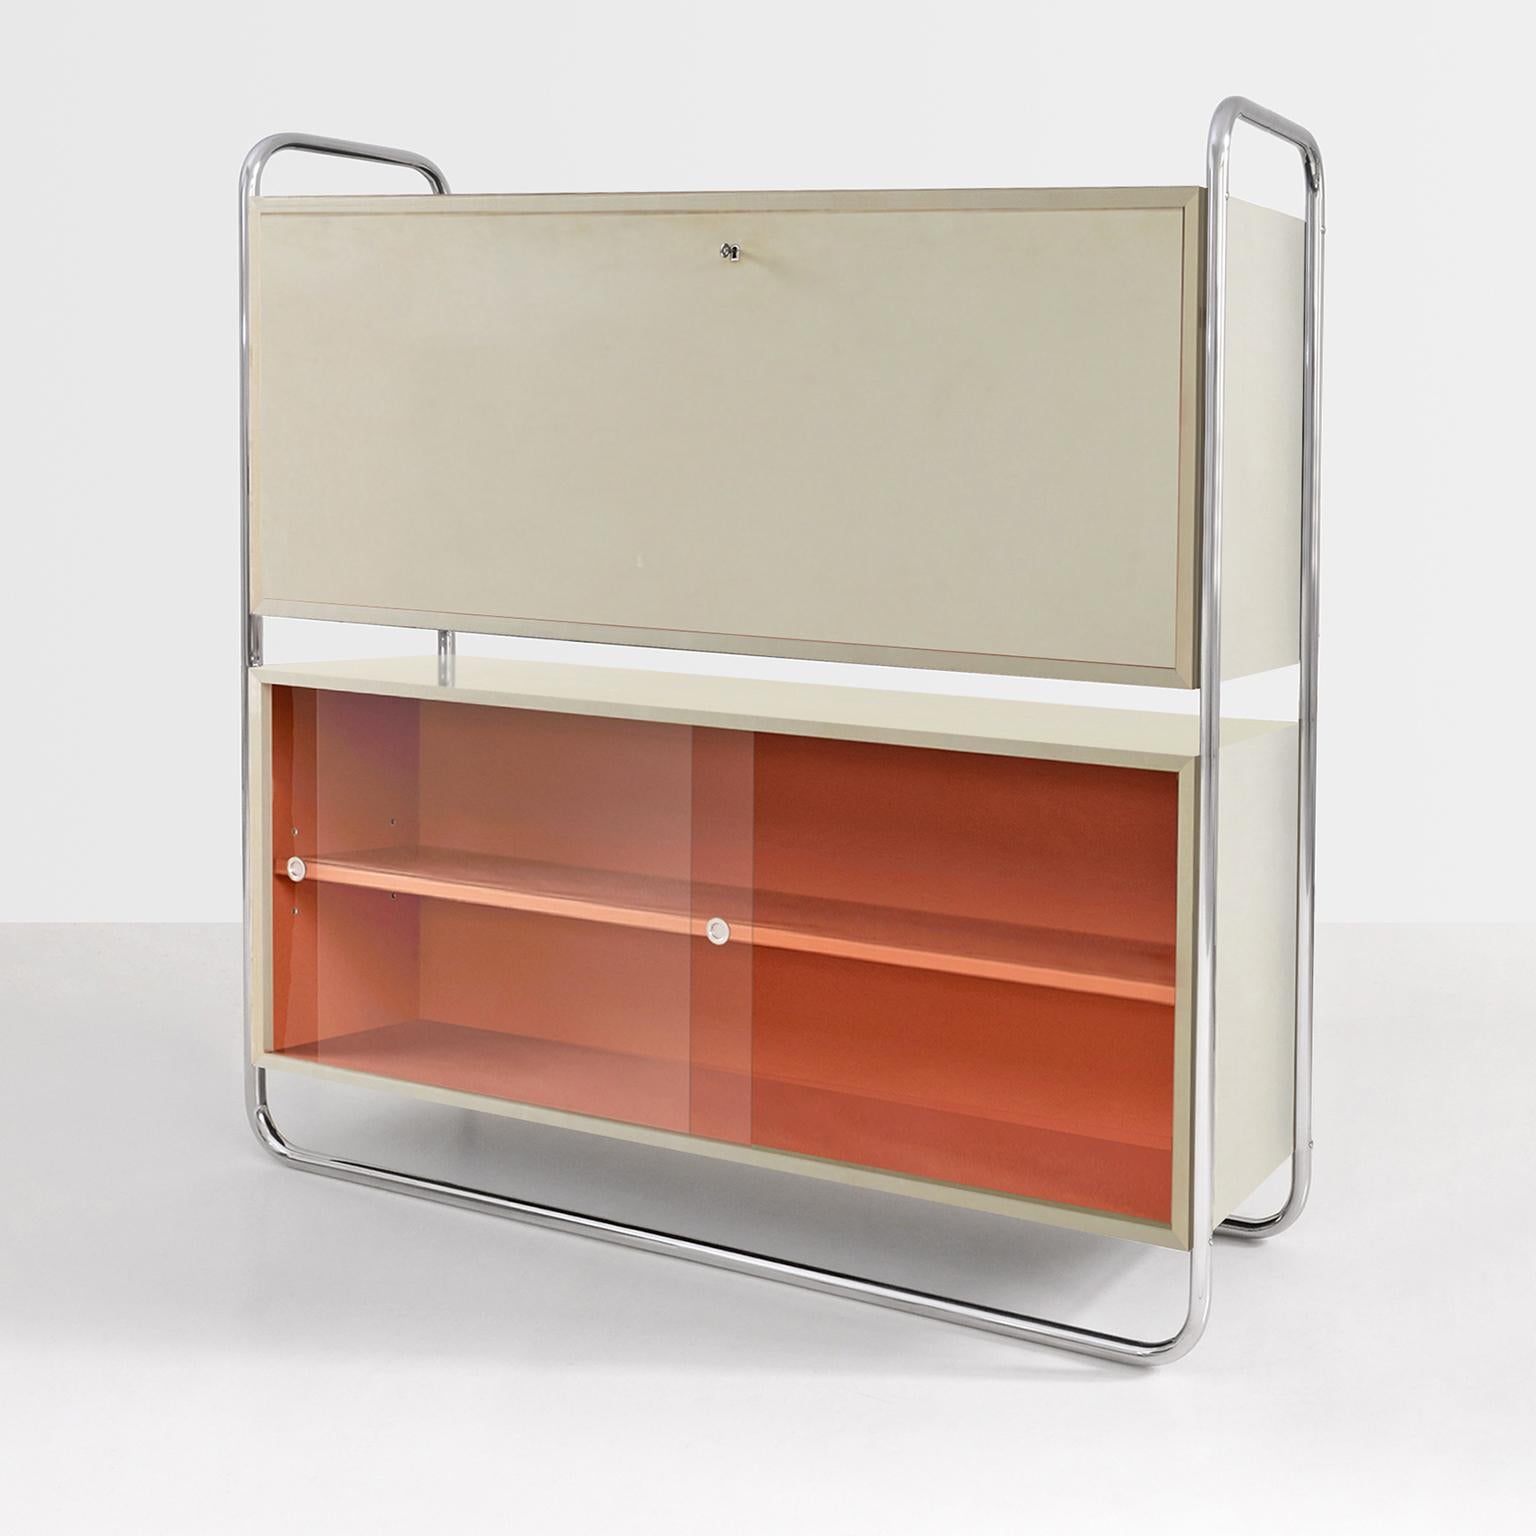 Modernist secretary showcase made of chrome plated tubular steel and lacquered or veneered wood. Customizable, production time: 9-10 weeks.